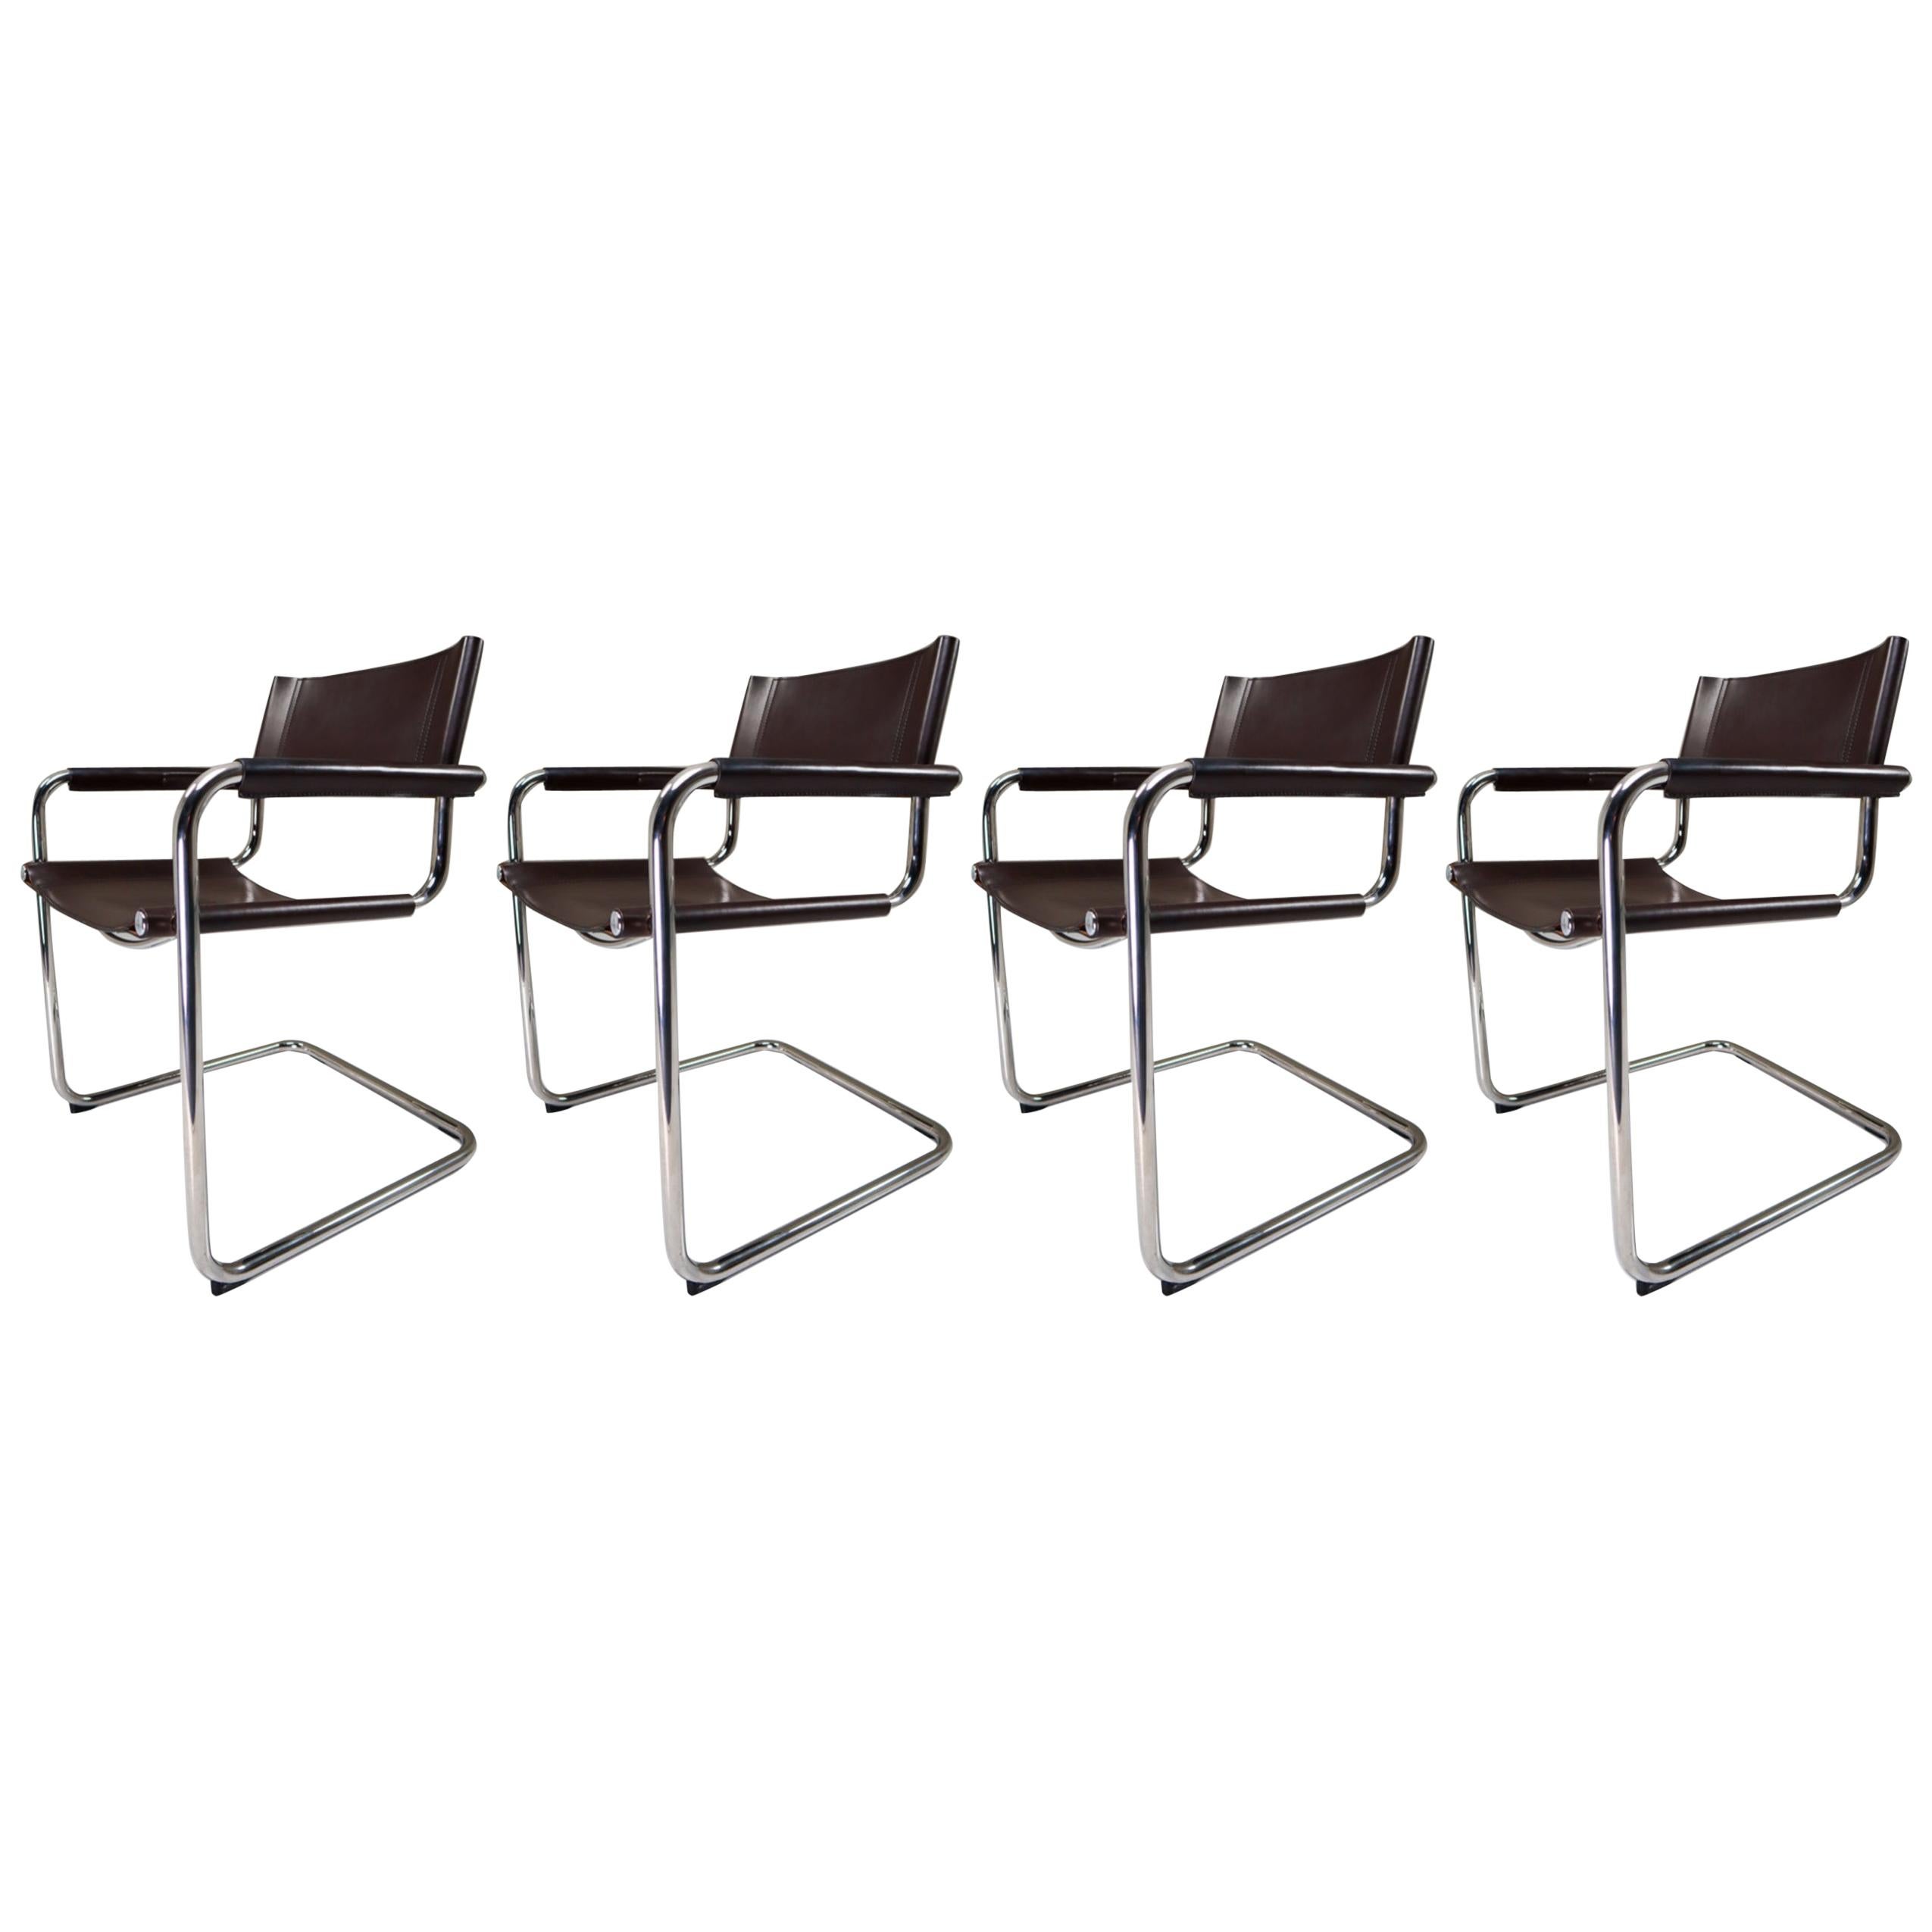 Four Mart Stam Model S33 Chocolate Brown Leather Cantilever Chairs by Fasem